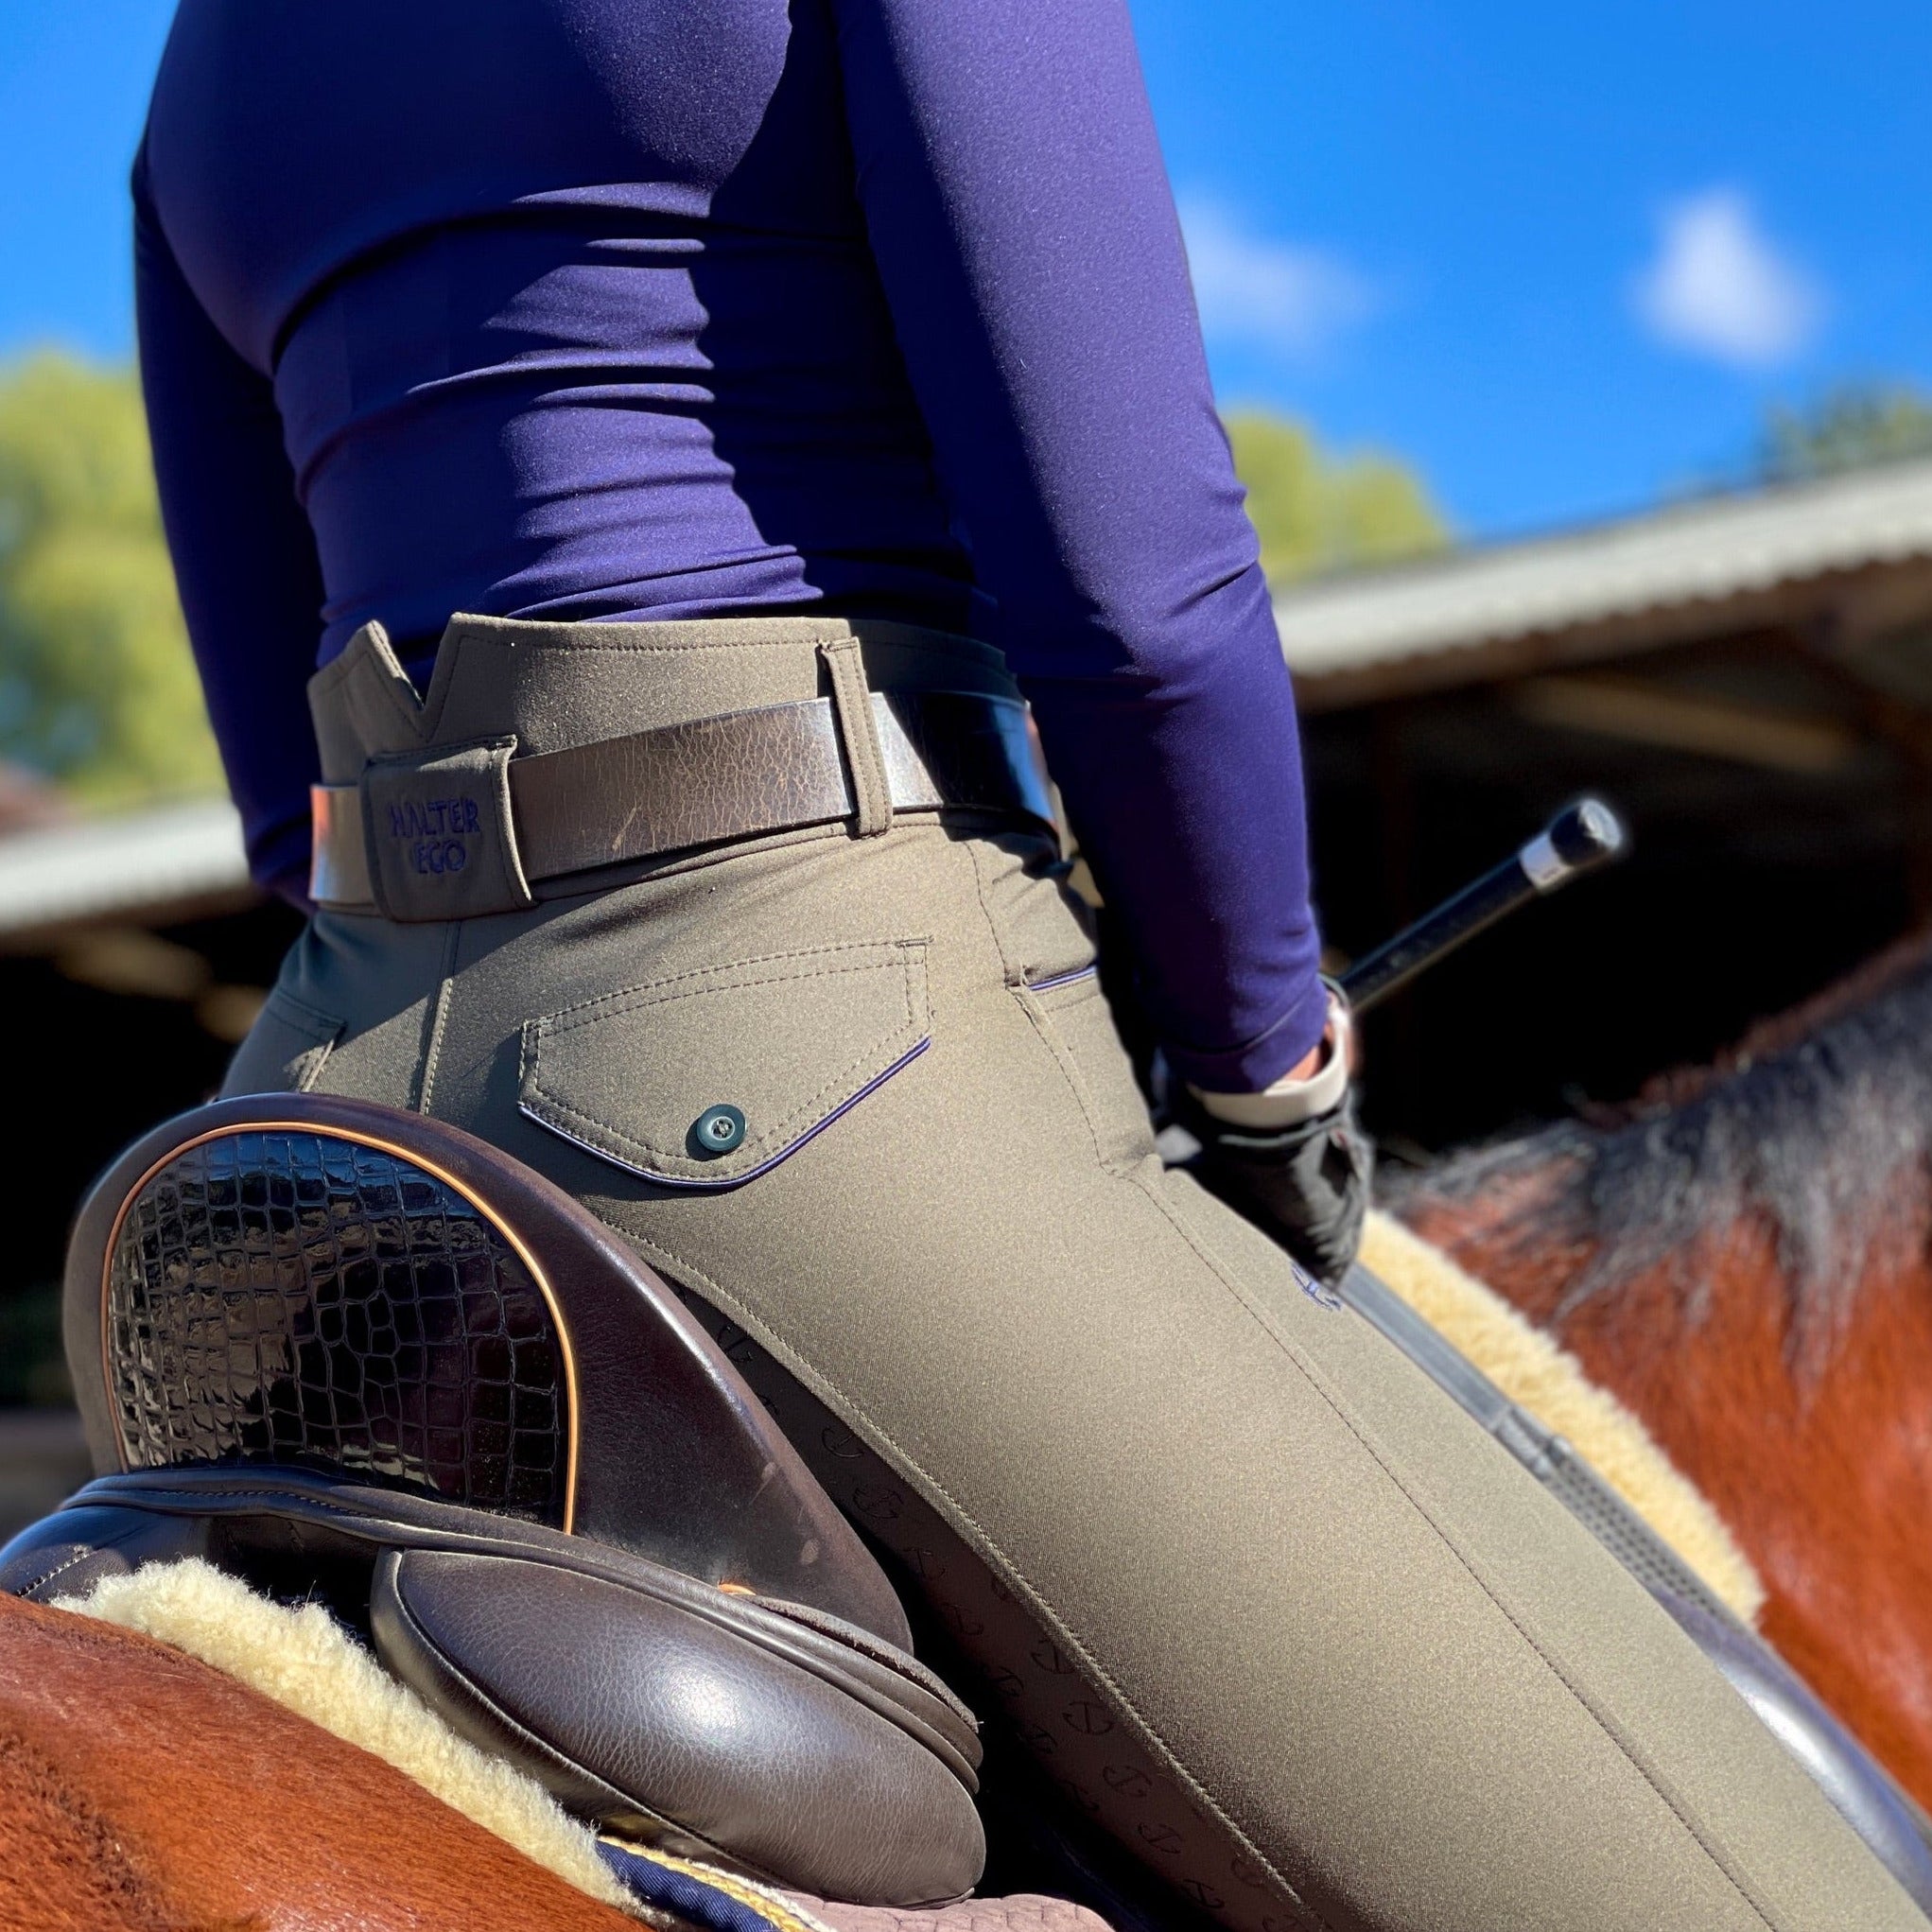 Ladies Olive Green Technical Riding Tights